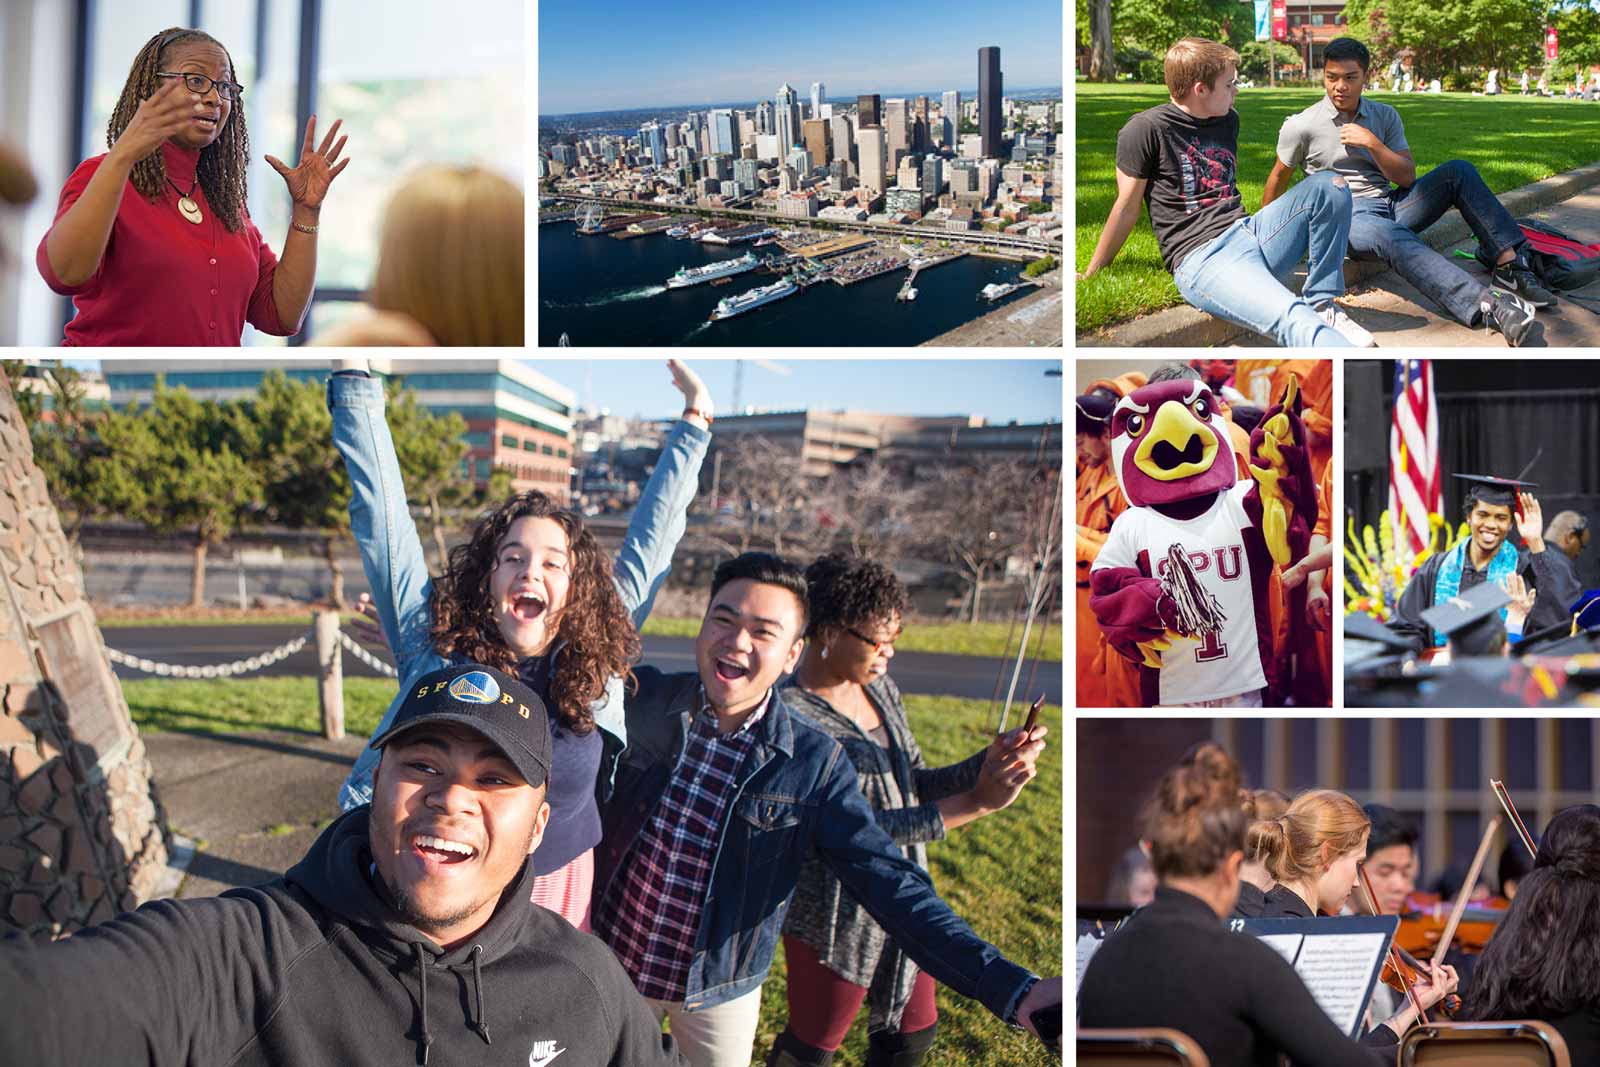 Collage of scenes around SPU, downtown Seattle, and various campus events. 